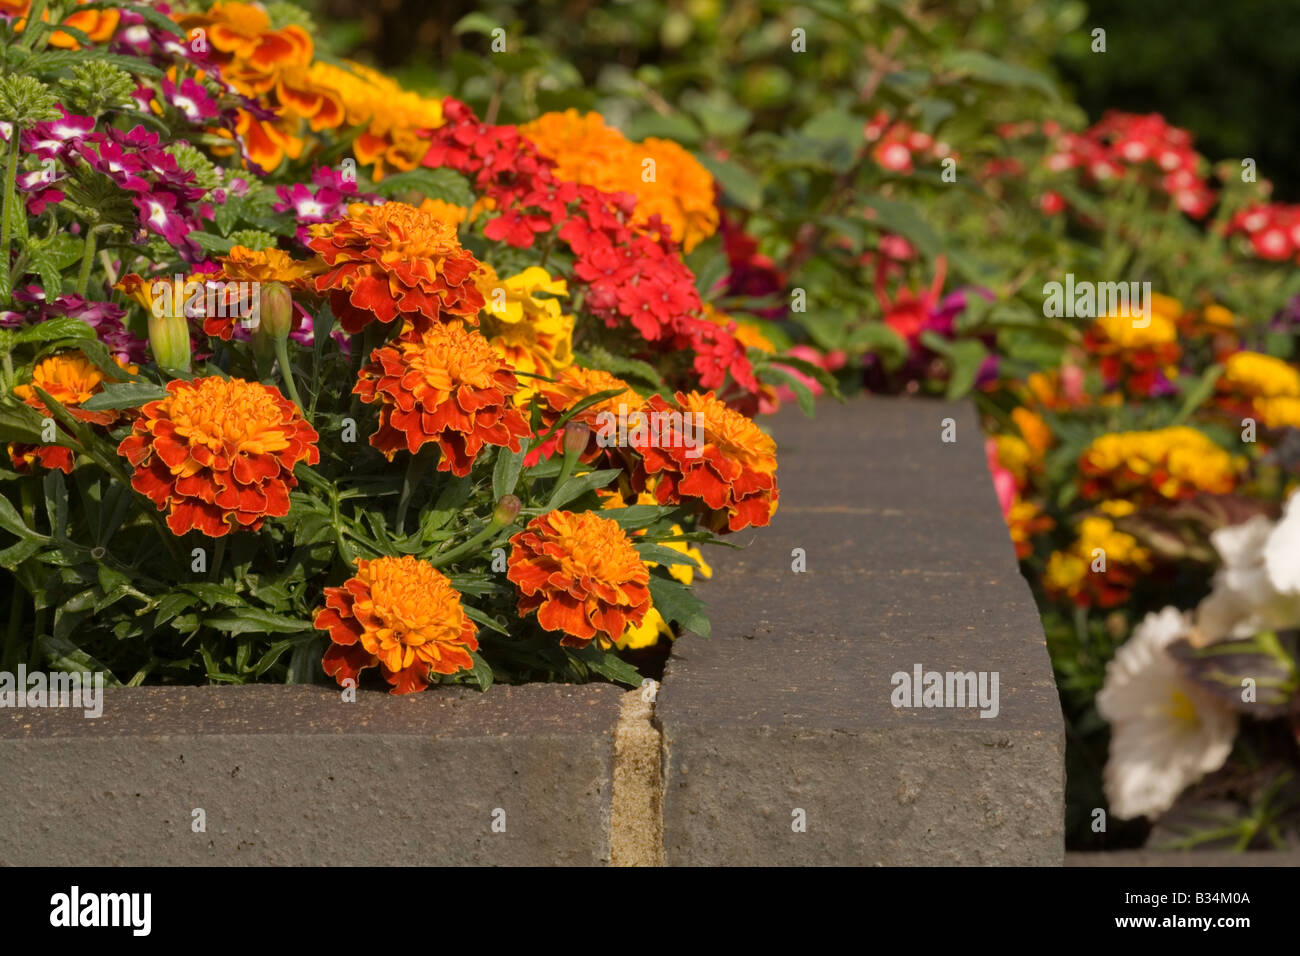 A raised flower bed in a garden Stock Photo